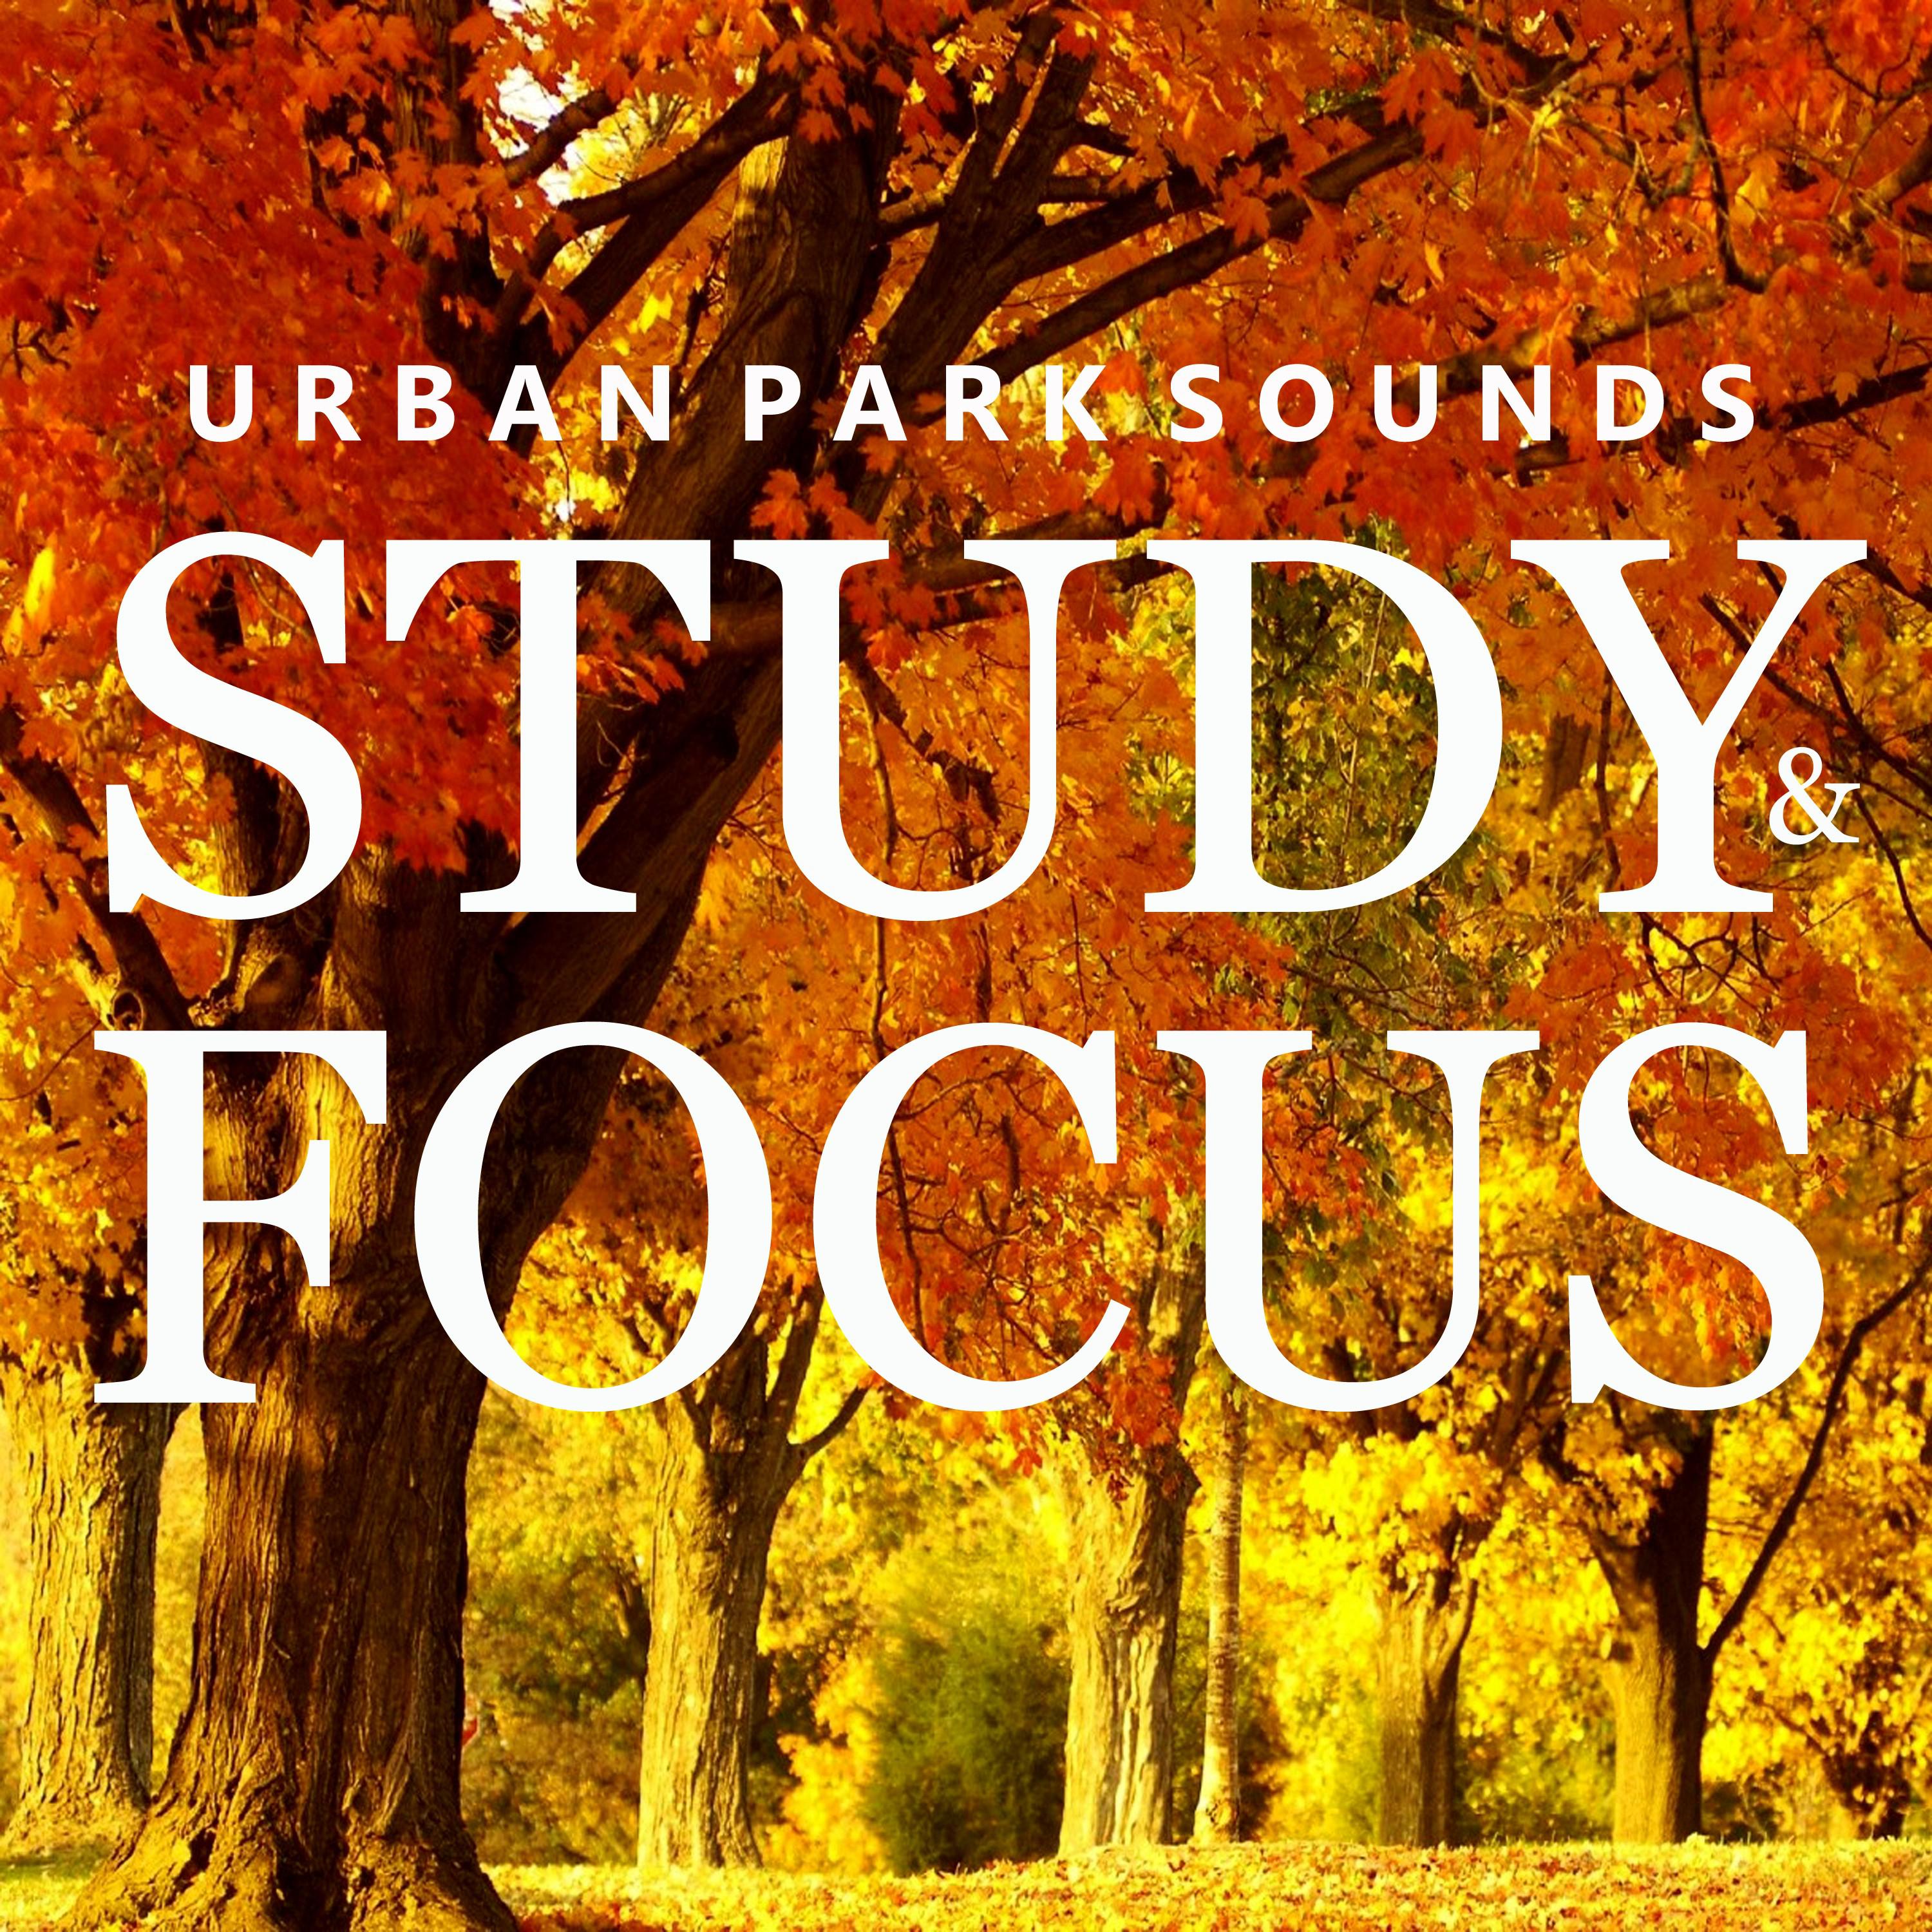 Urban Park Sounds for Studying, Pt. 02